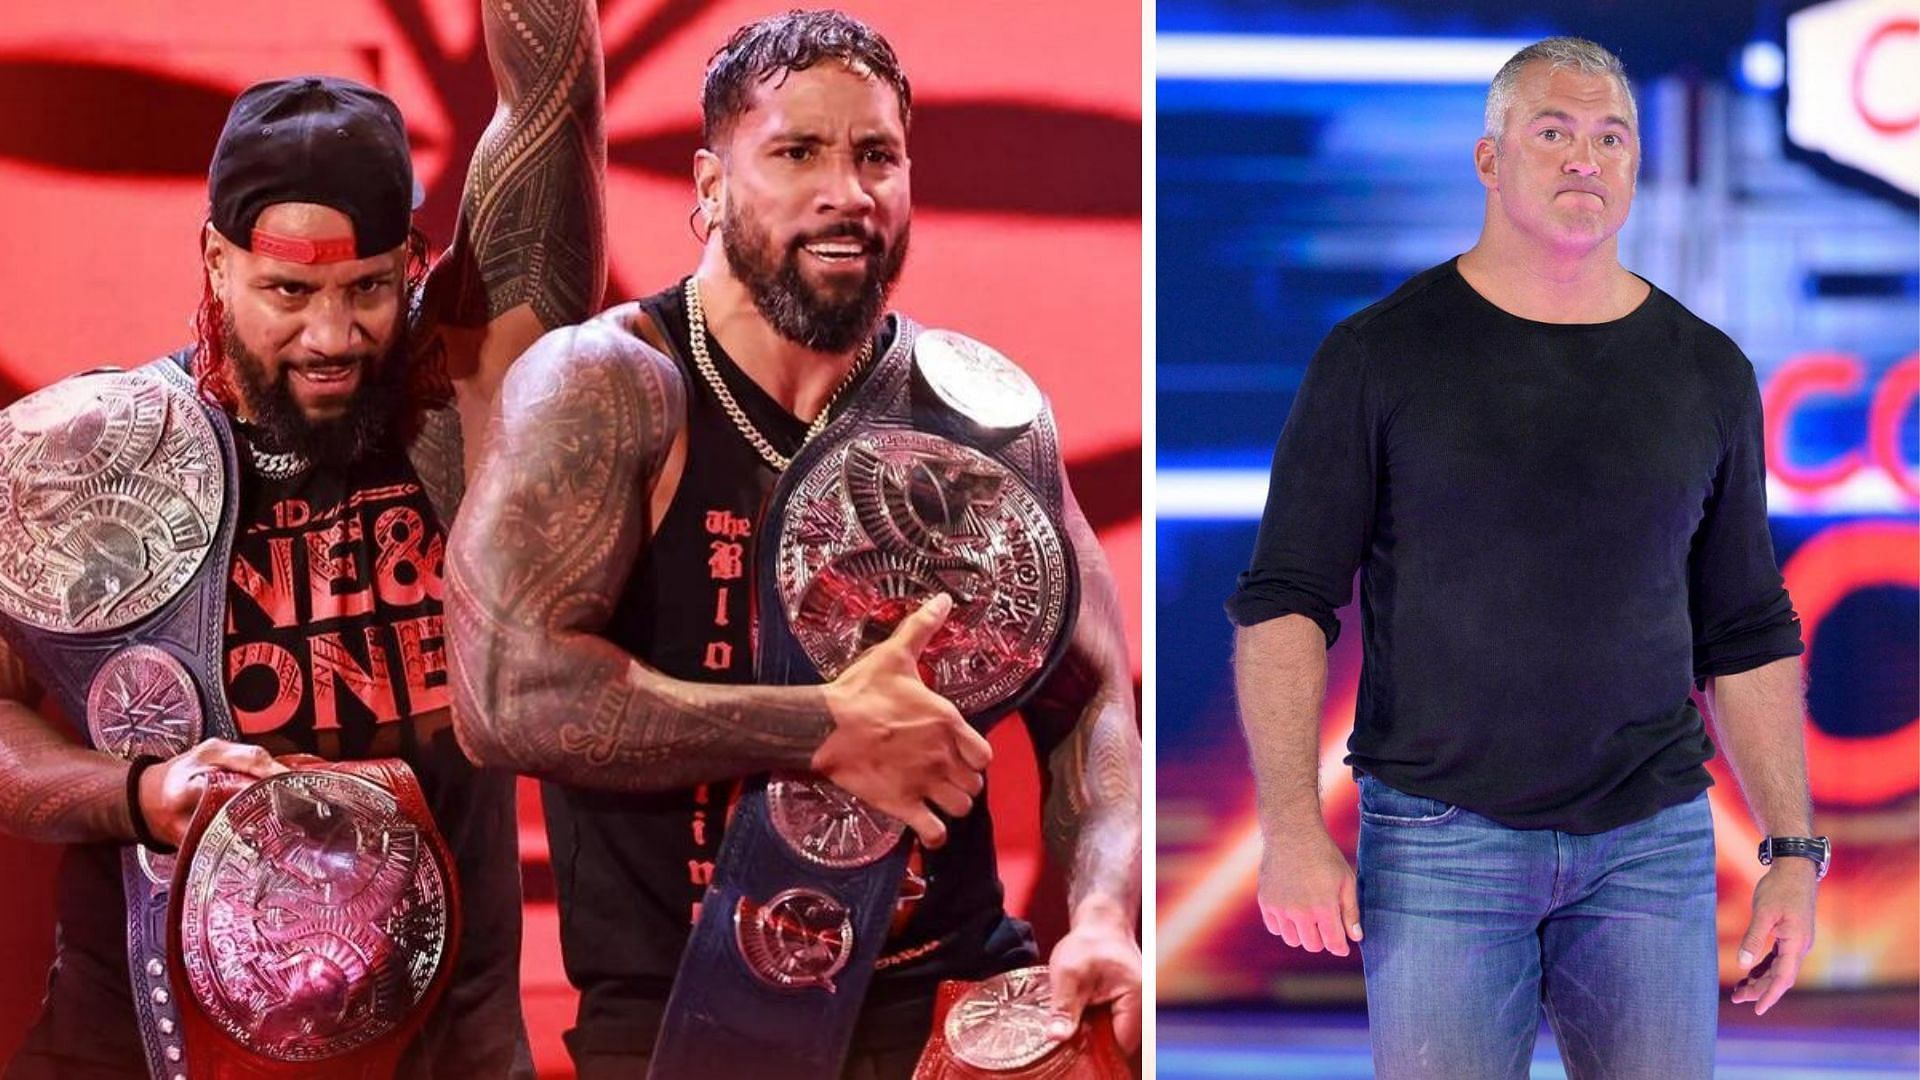 4th generation WWE Superstars Jimmy and Jey Uso and Shane McMahon